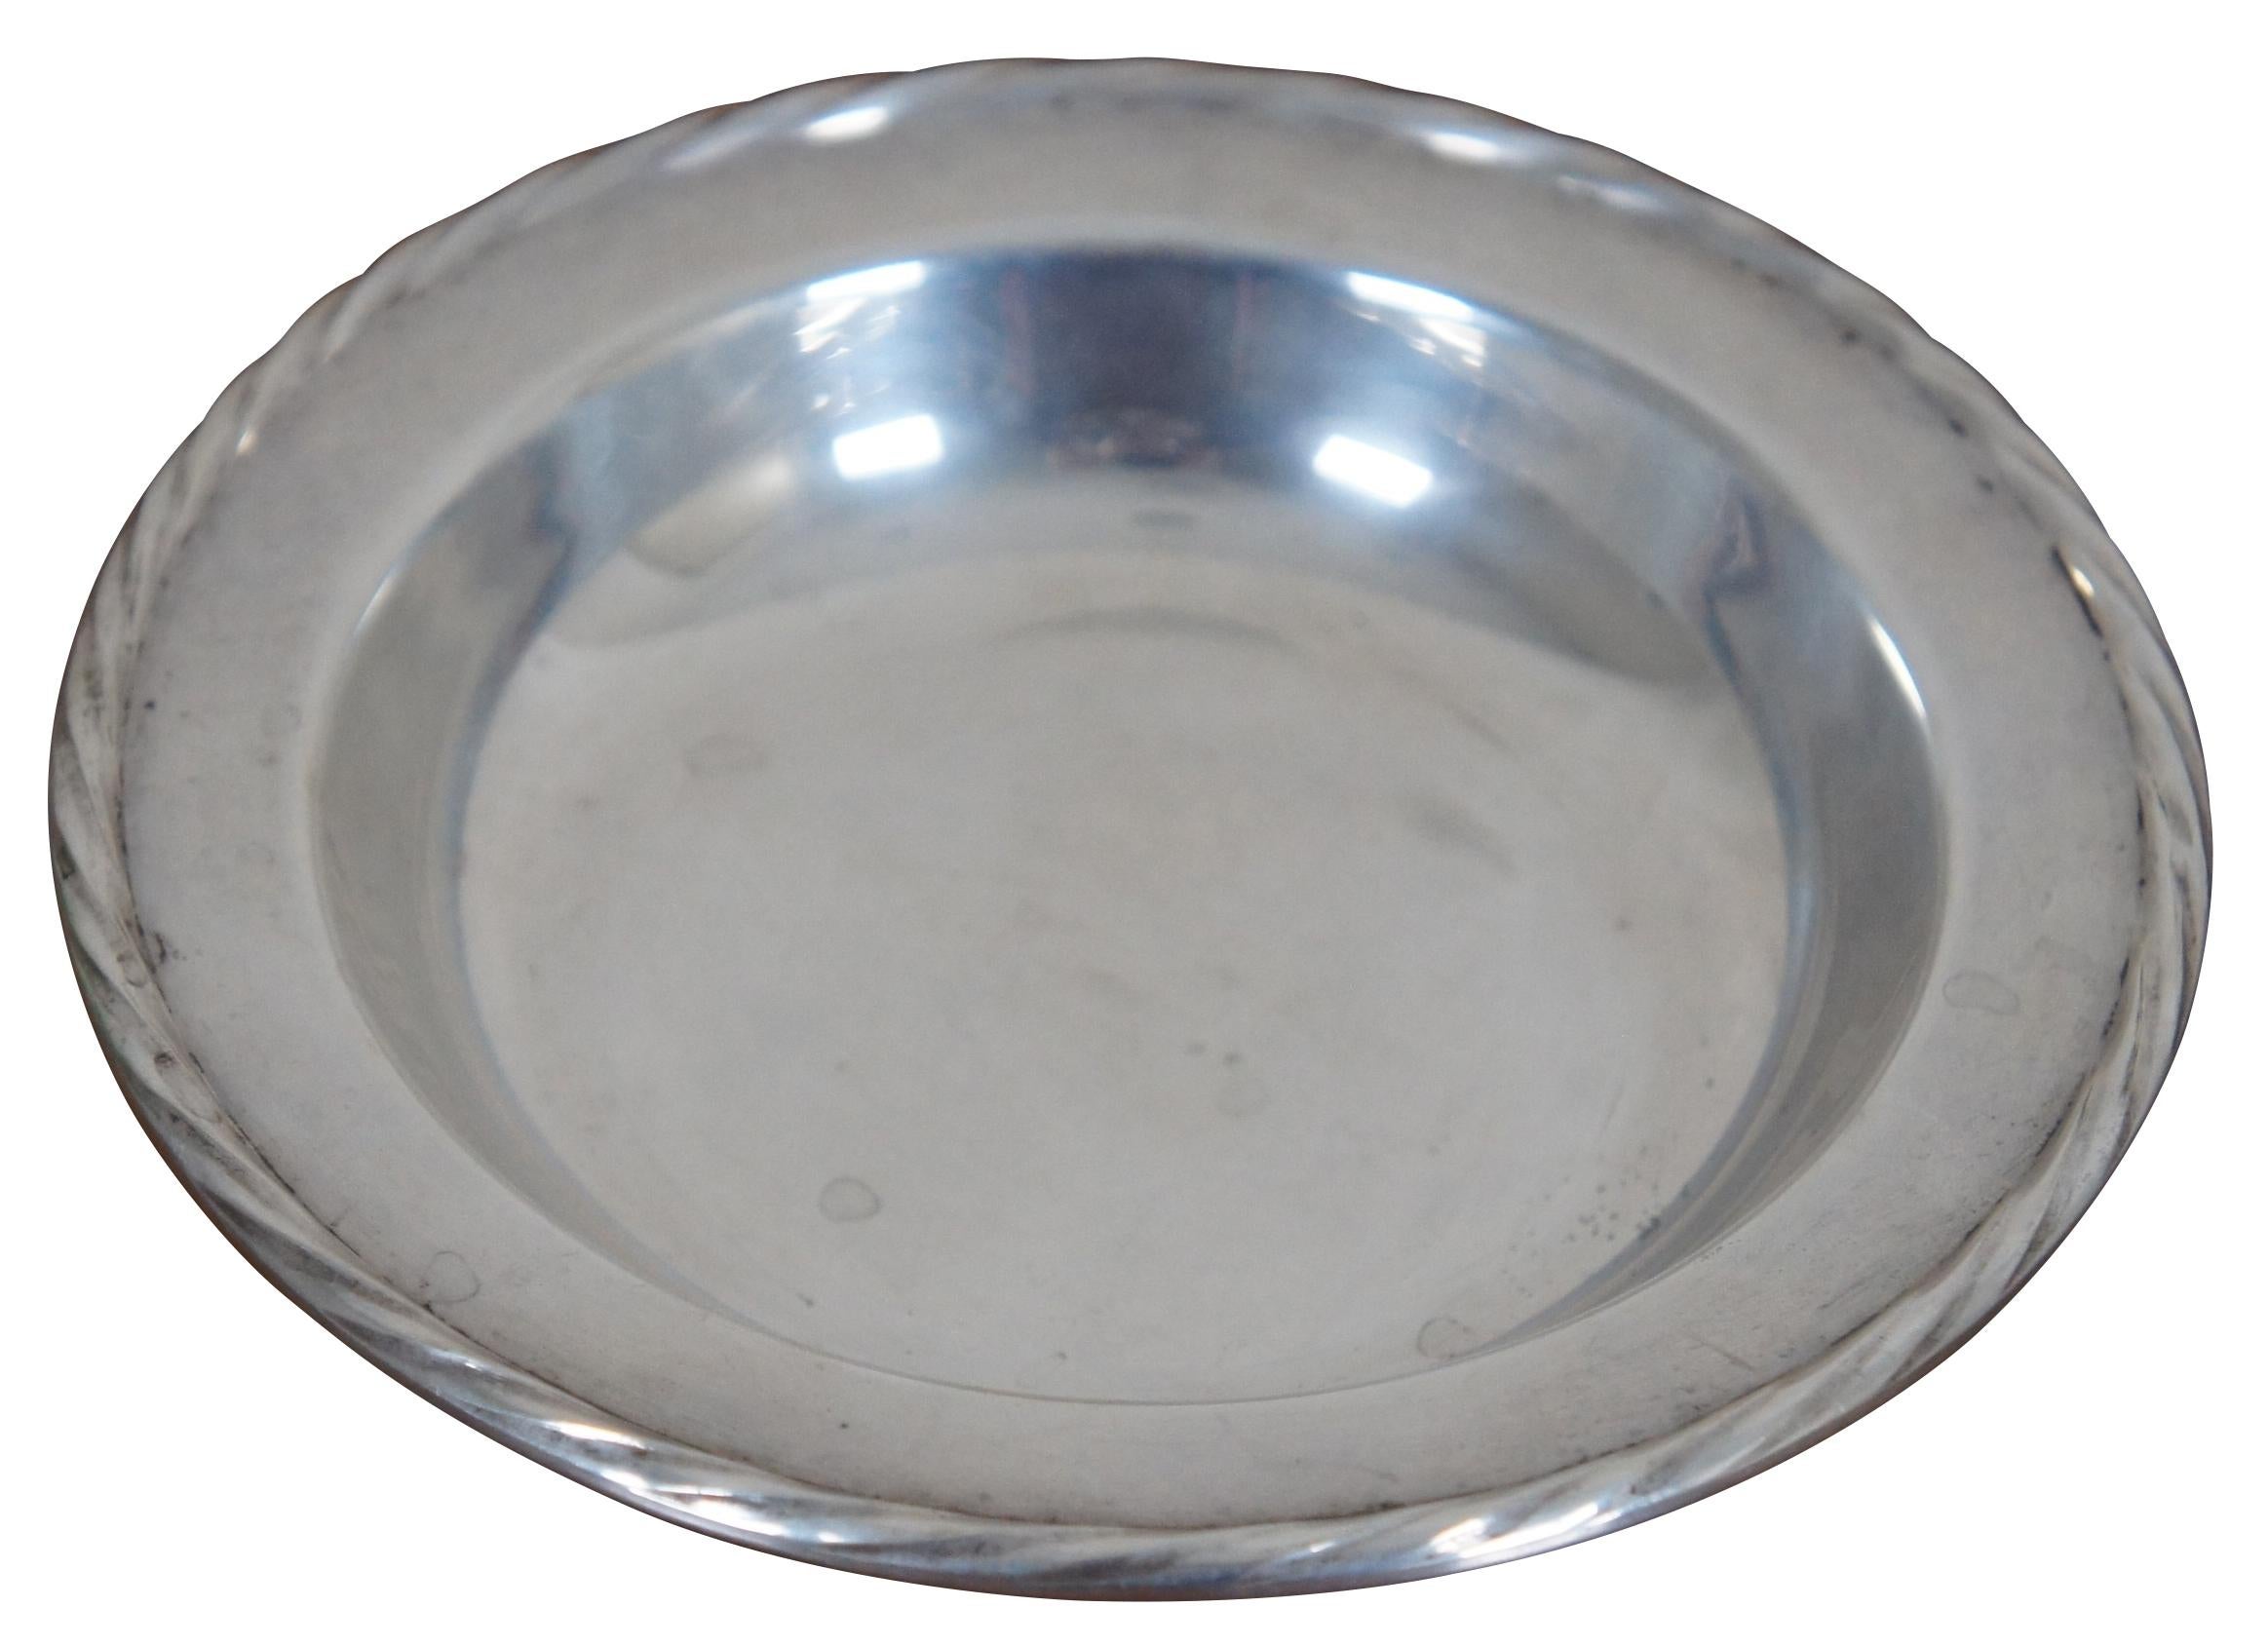 Vintage Towle sterling silver round candy dish with the Flute pattern edge. “Newburyport, Massachusetts - Active 1882-present. Large manufacturer, full line of sterling flatware and holloware. Lion T trademark was first used c. 1890.”

Measures: